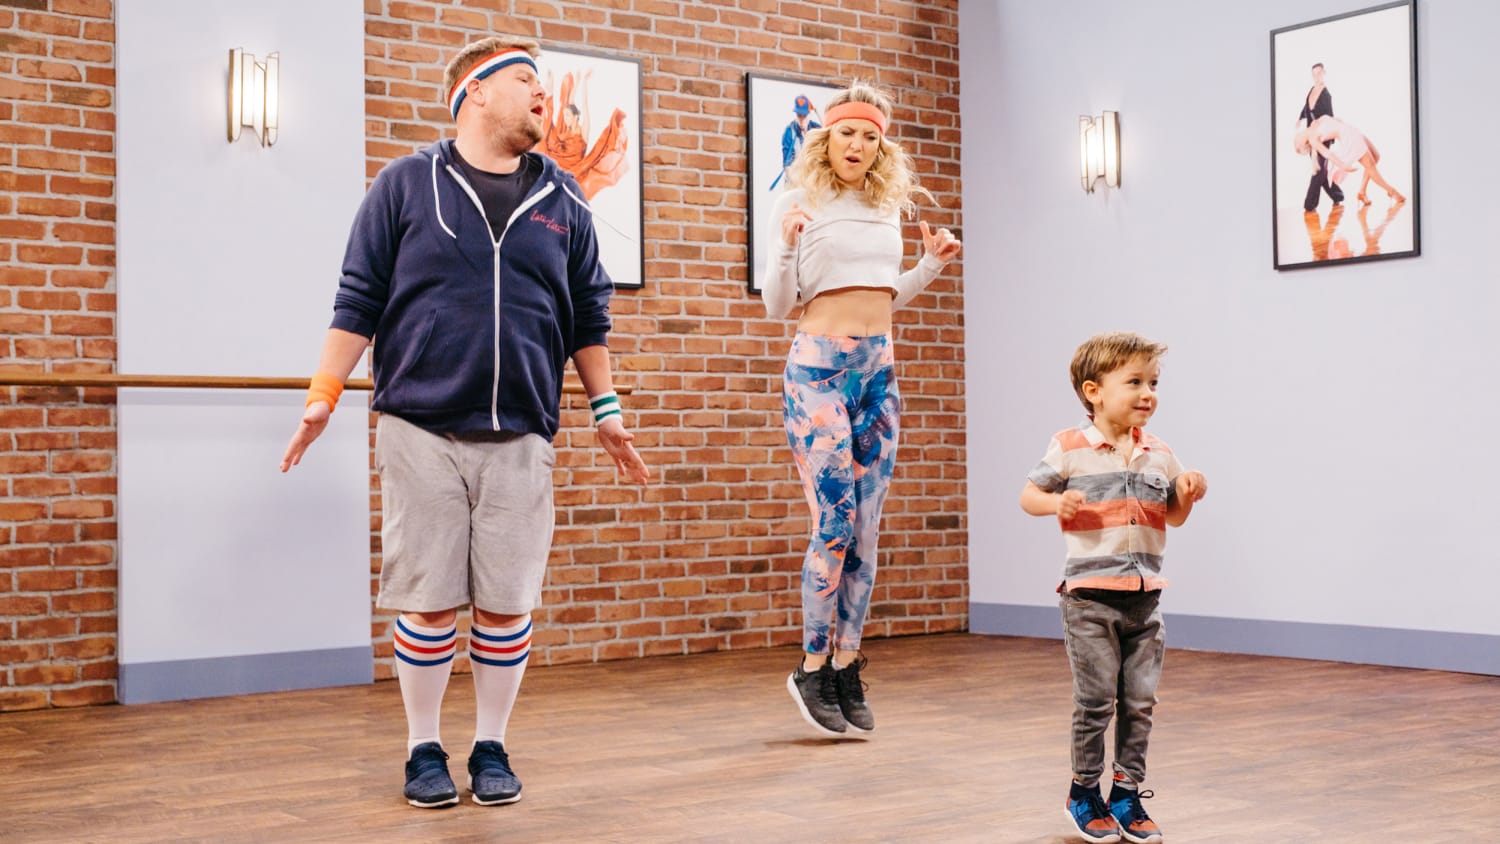 Watch Kate Hudson, James Corden try to keep up with kids in 'Toddlerography'